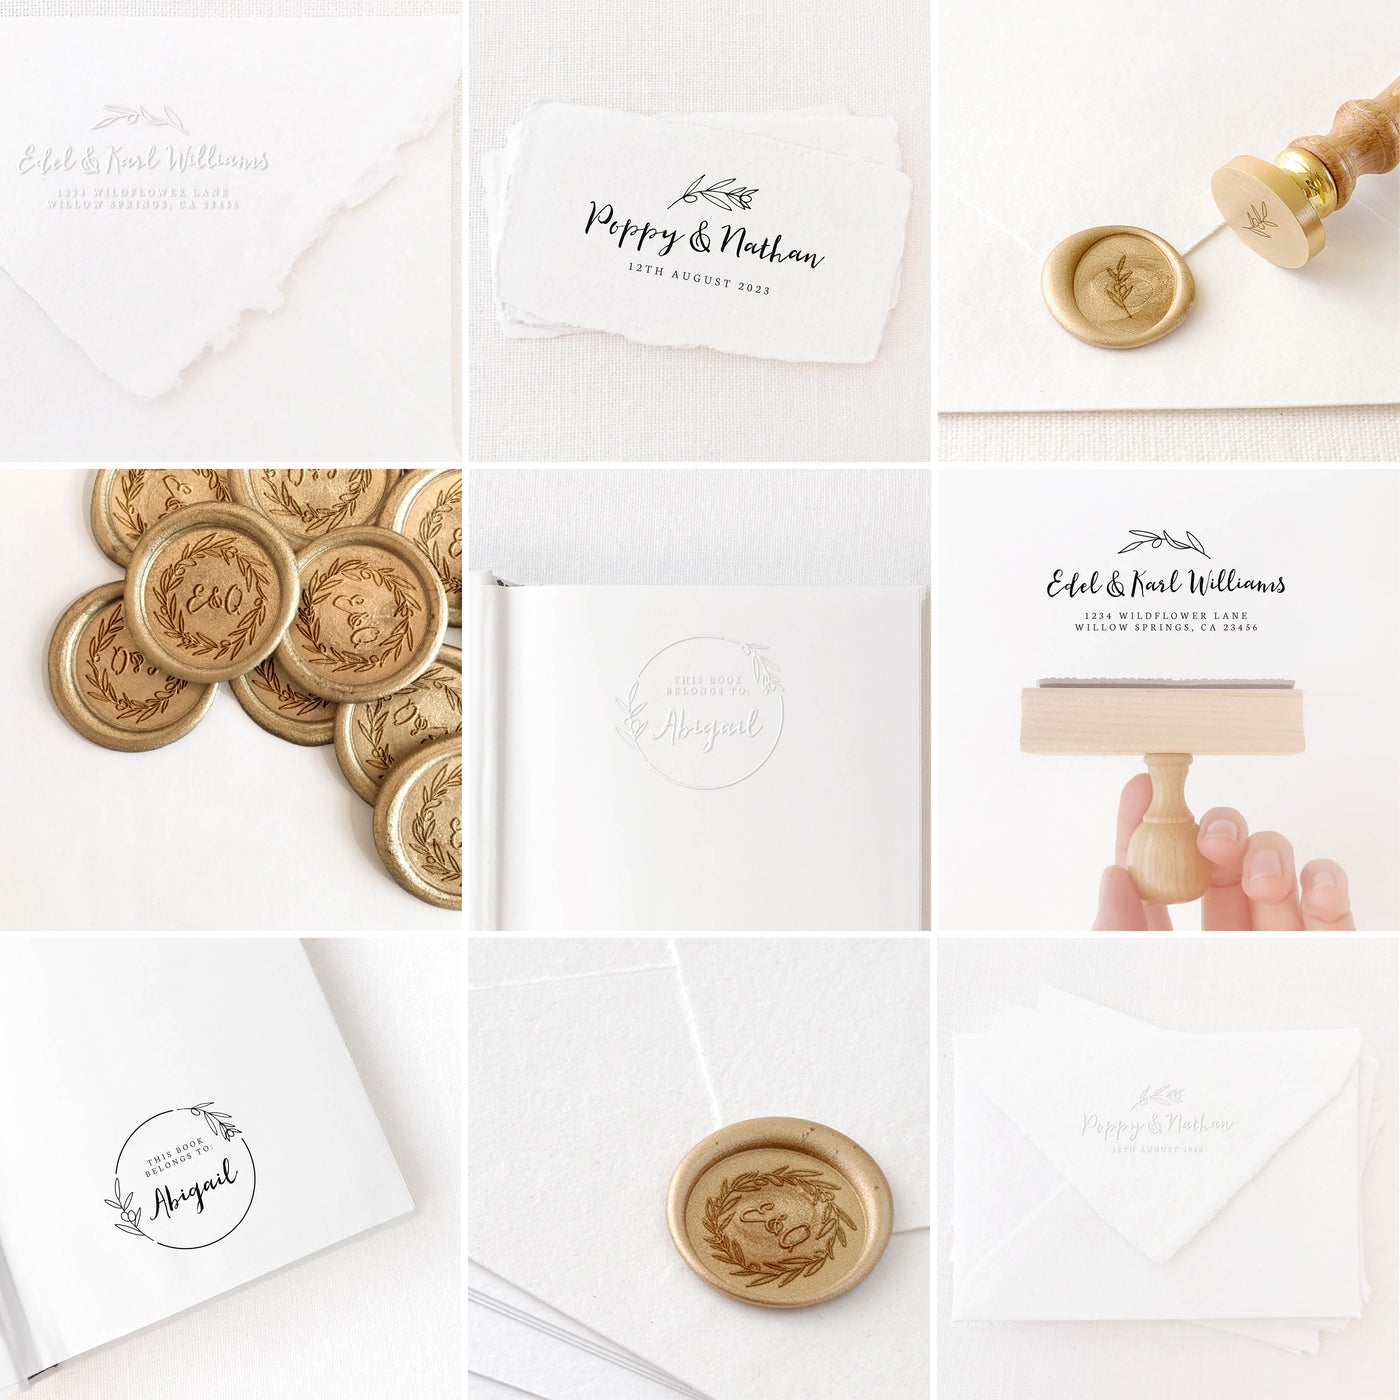 Olivia Botanical Calligraphy Script Collection | Custom Rubber Stamp, Wax Seal Stickers & Embosser for Custom Luxe Embellishment Packaging & Fine Art Wedding Stationery Invitations | Heirloom Seals